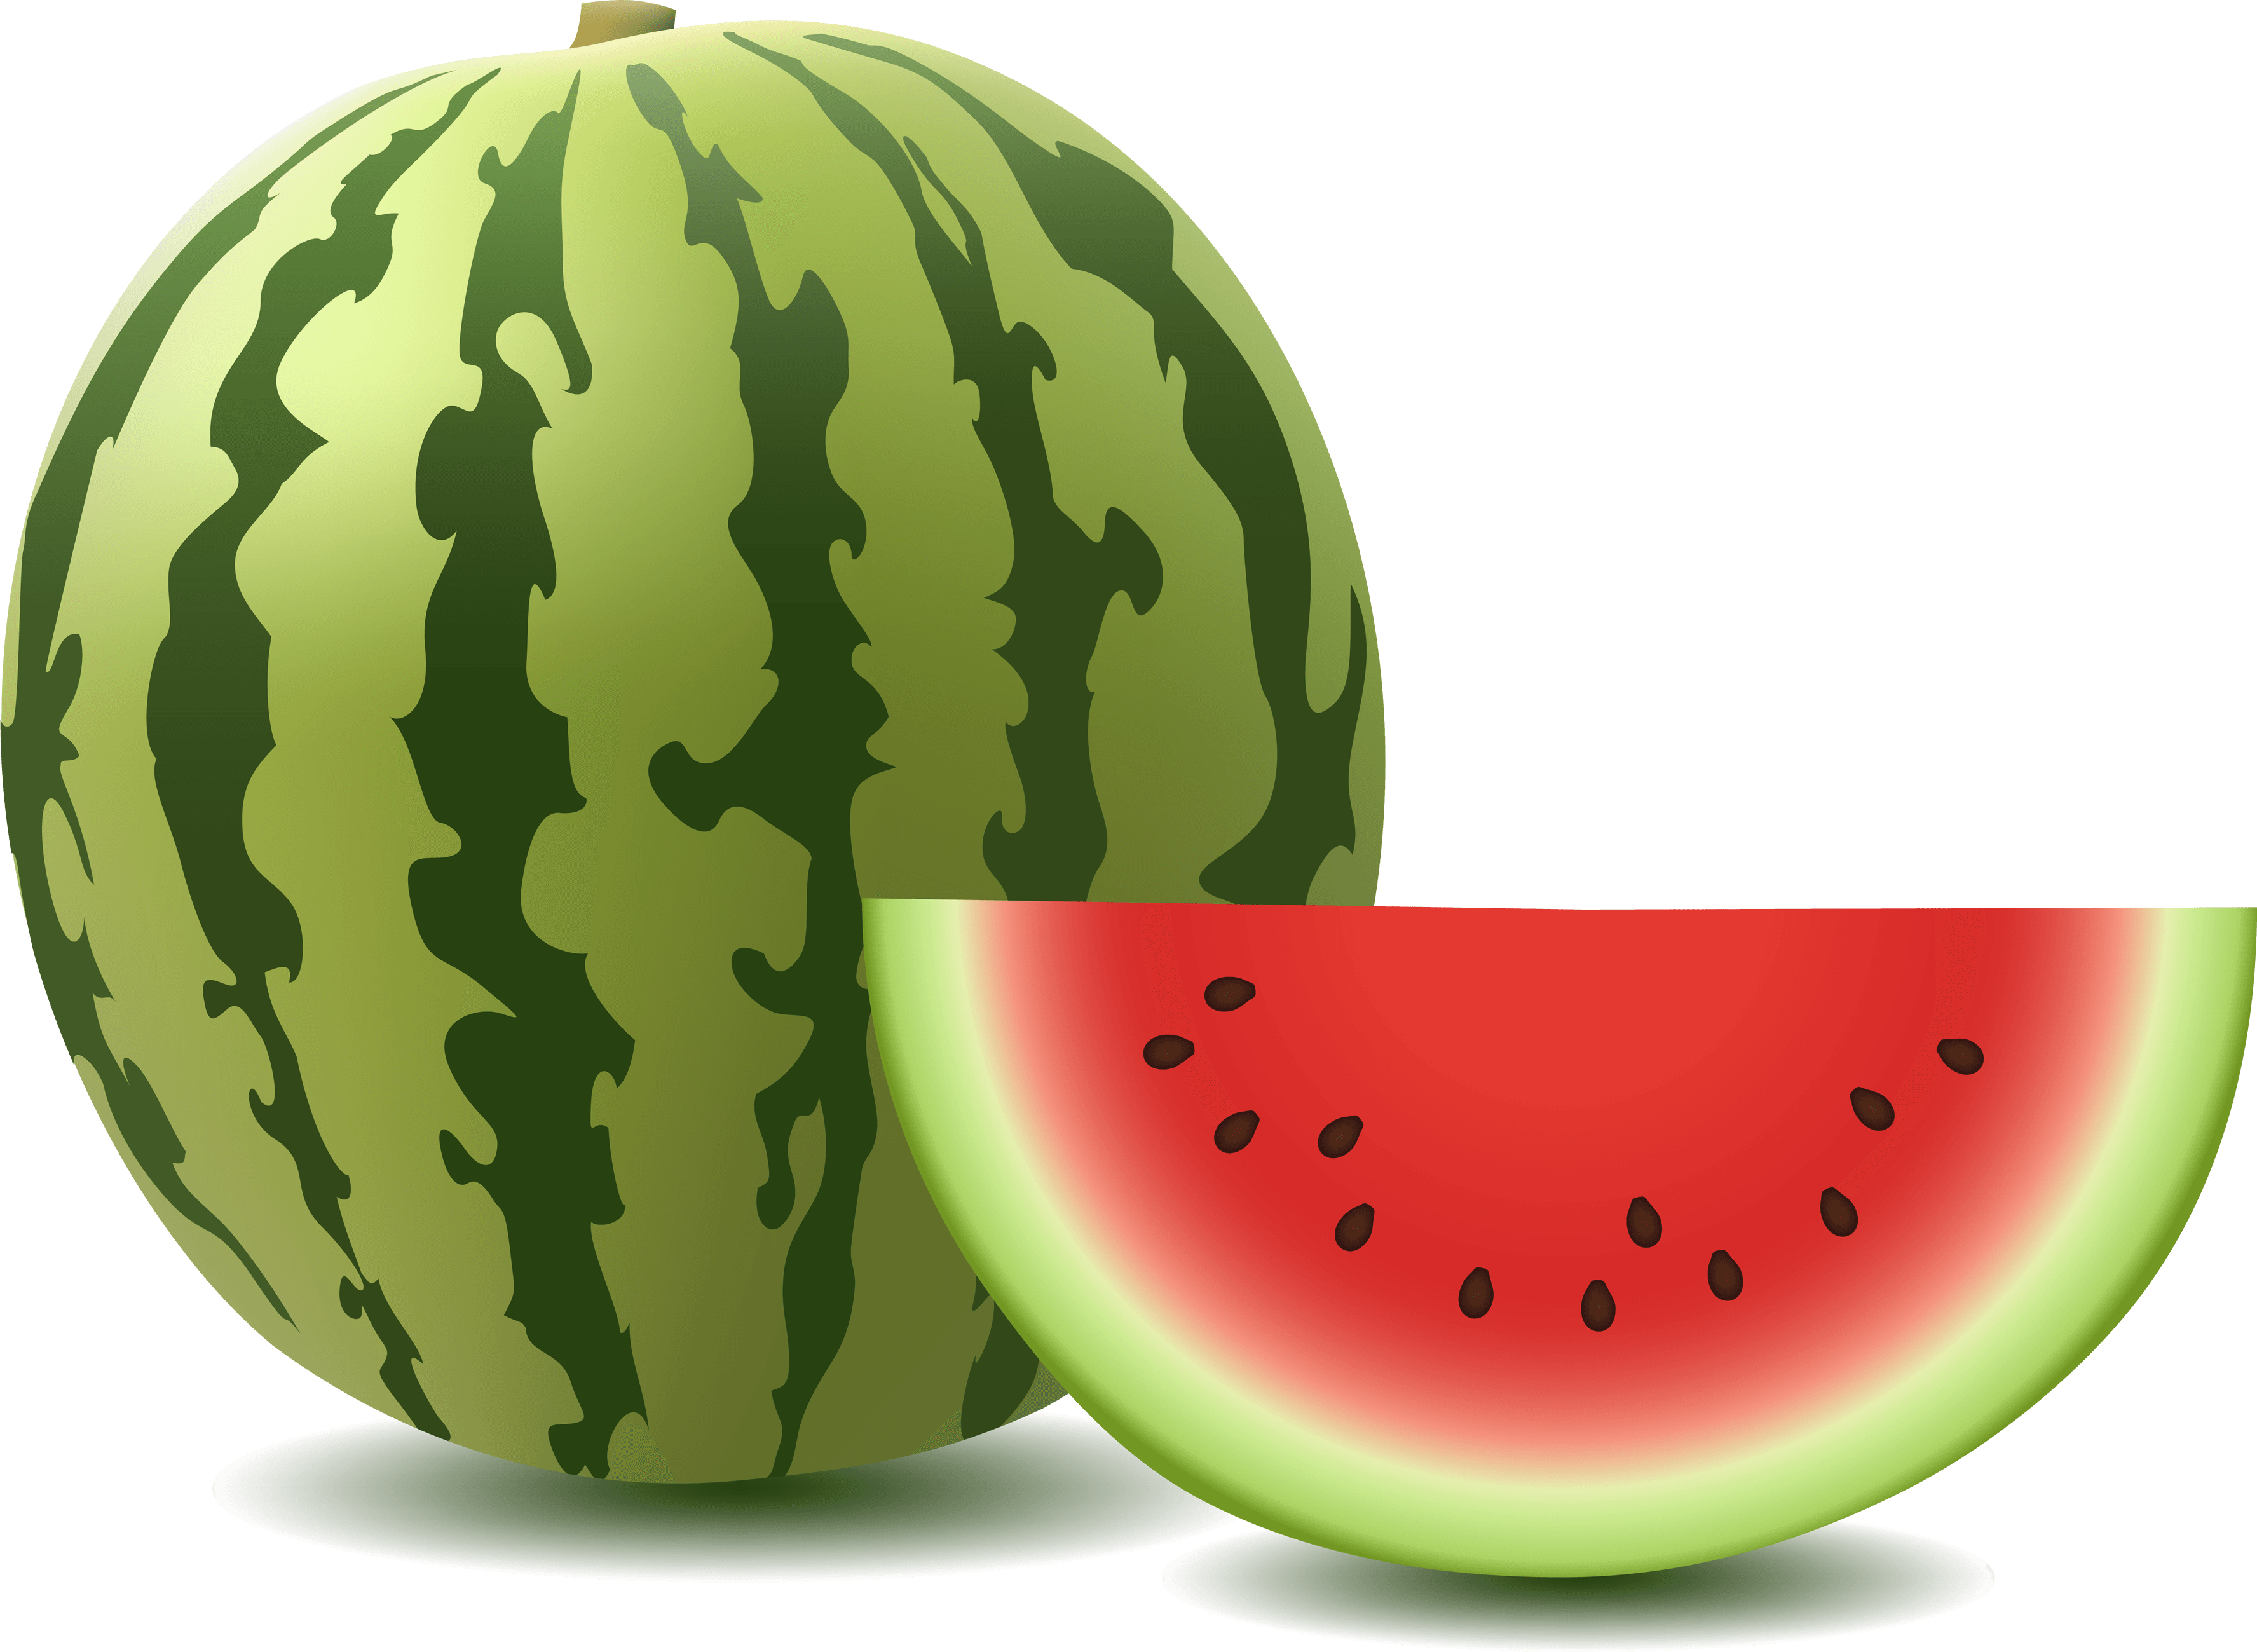 Watermelon Png Image PNG Image